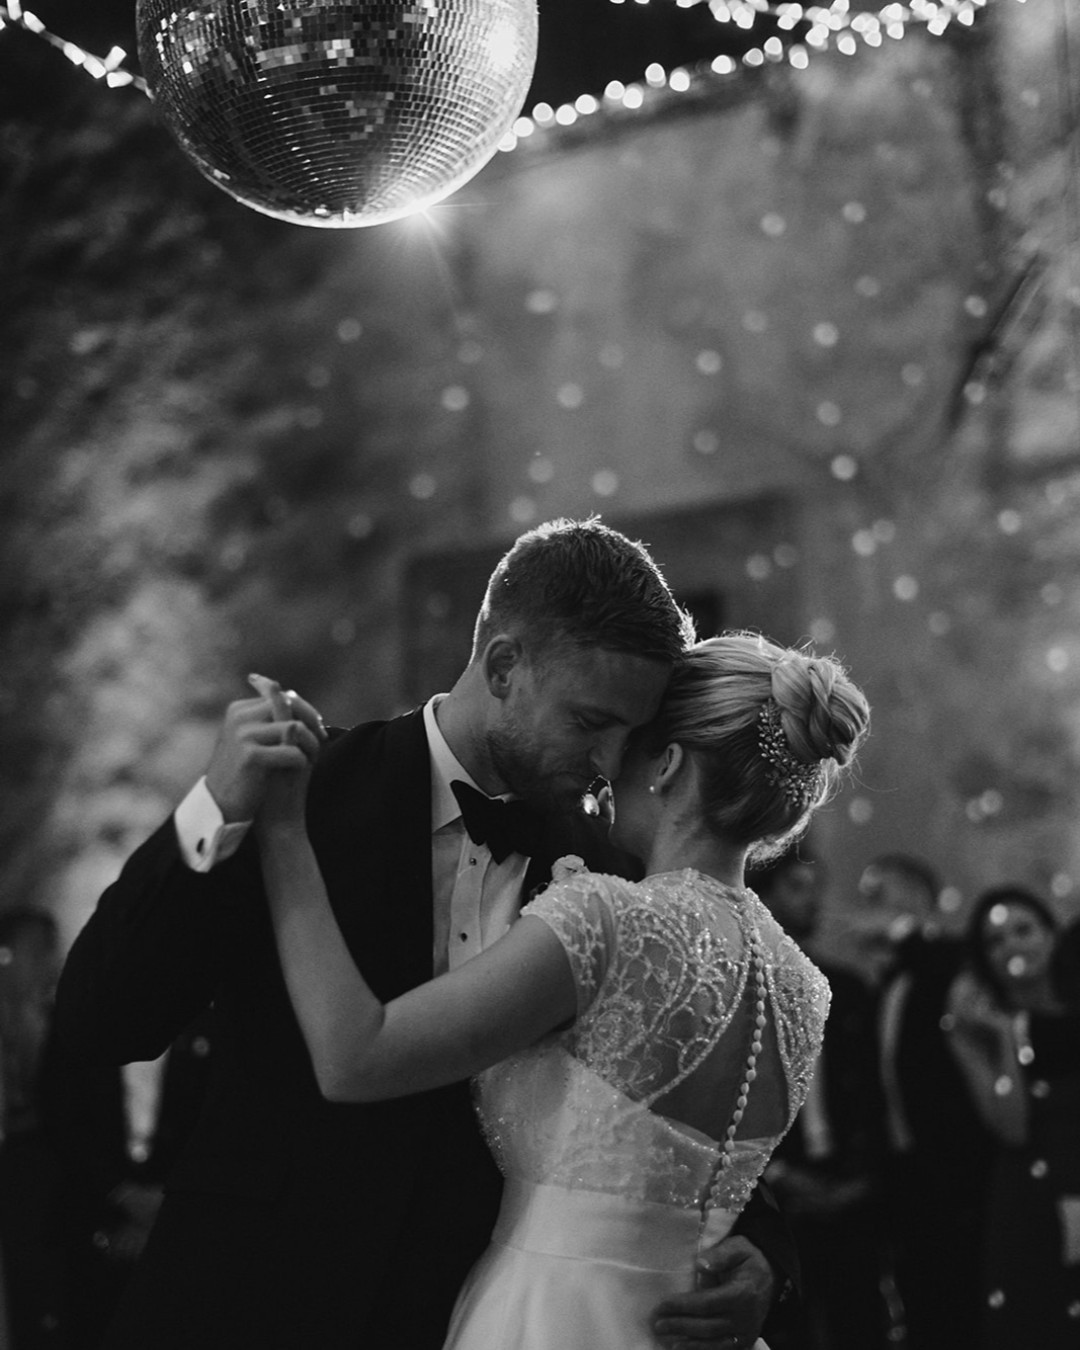 100 Best Songs to Dance to at Your Wedding Reception